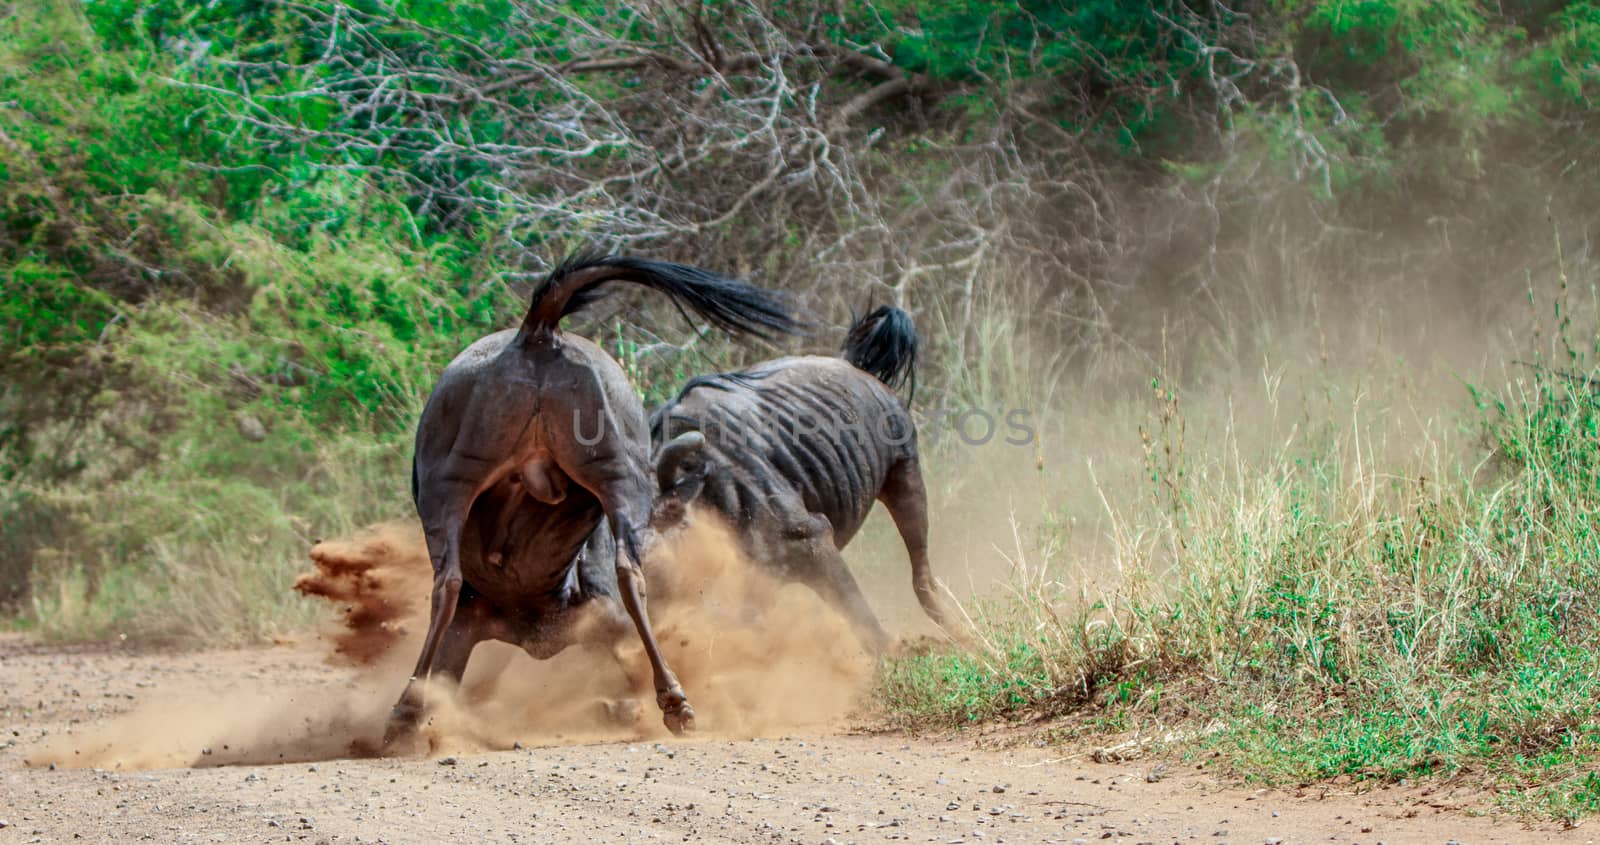 Fighting Blue wildebeest in the Kruger National Park, South Africa.